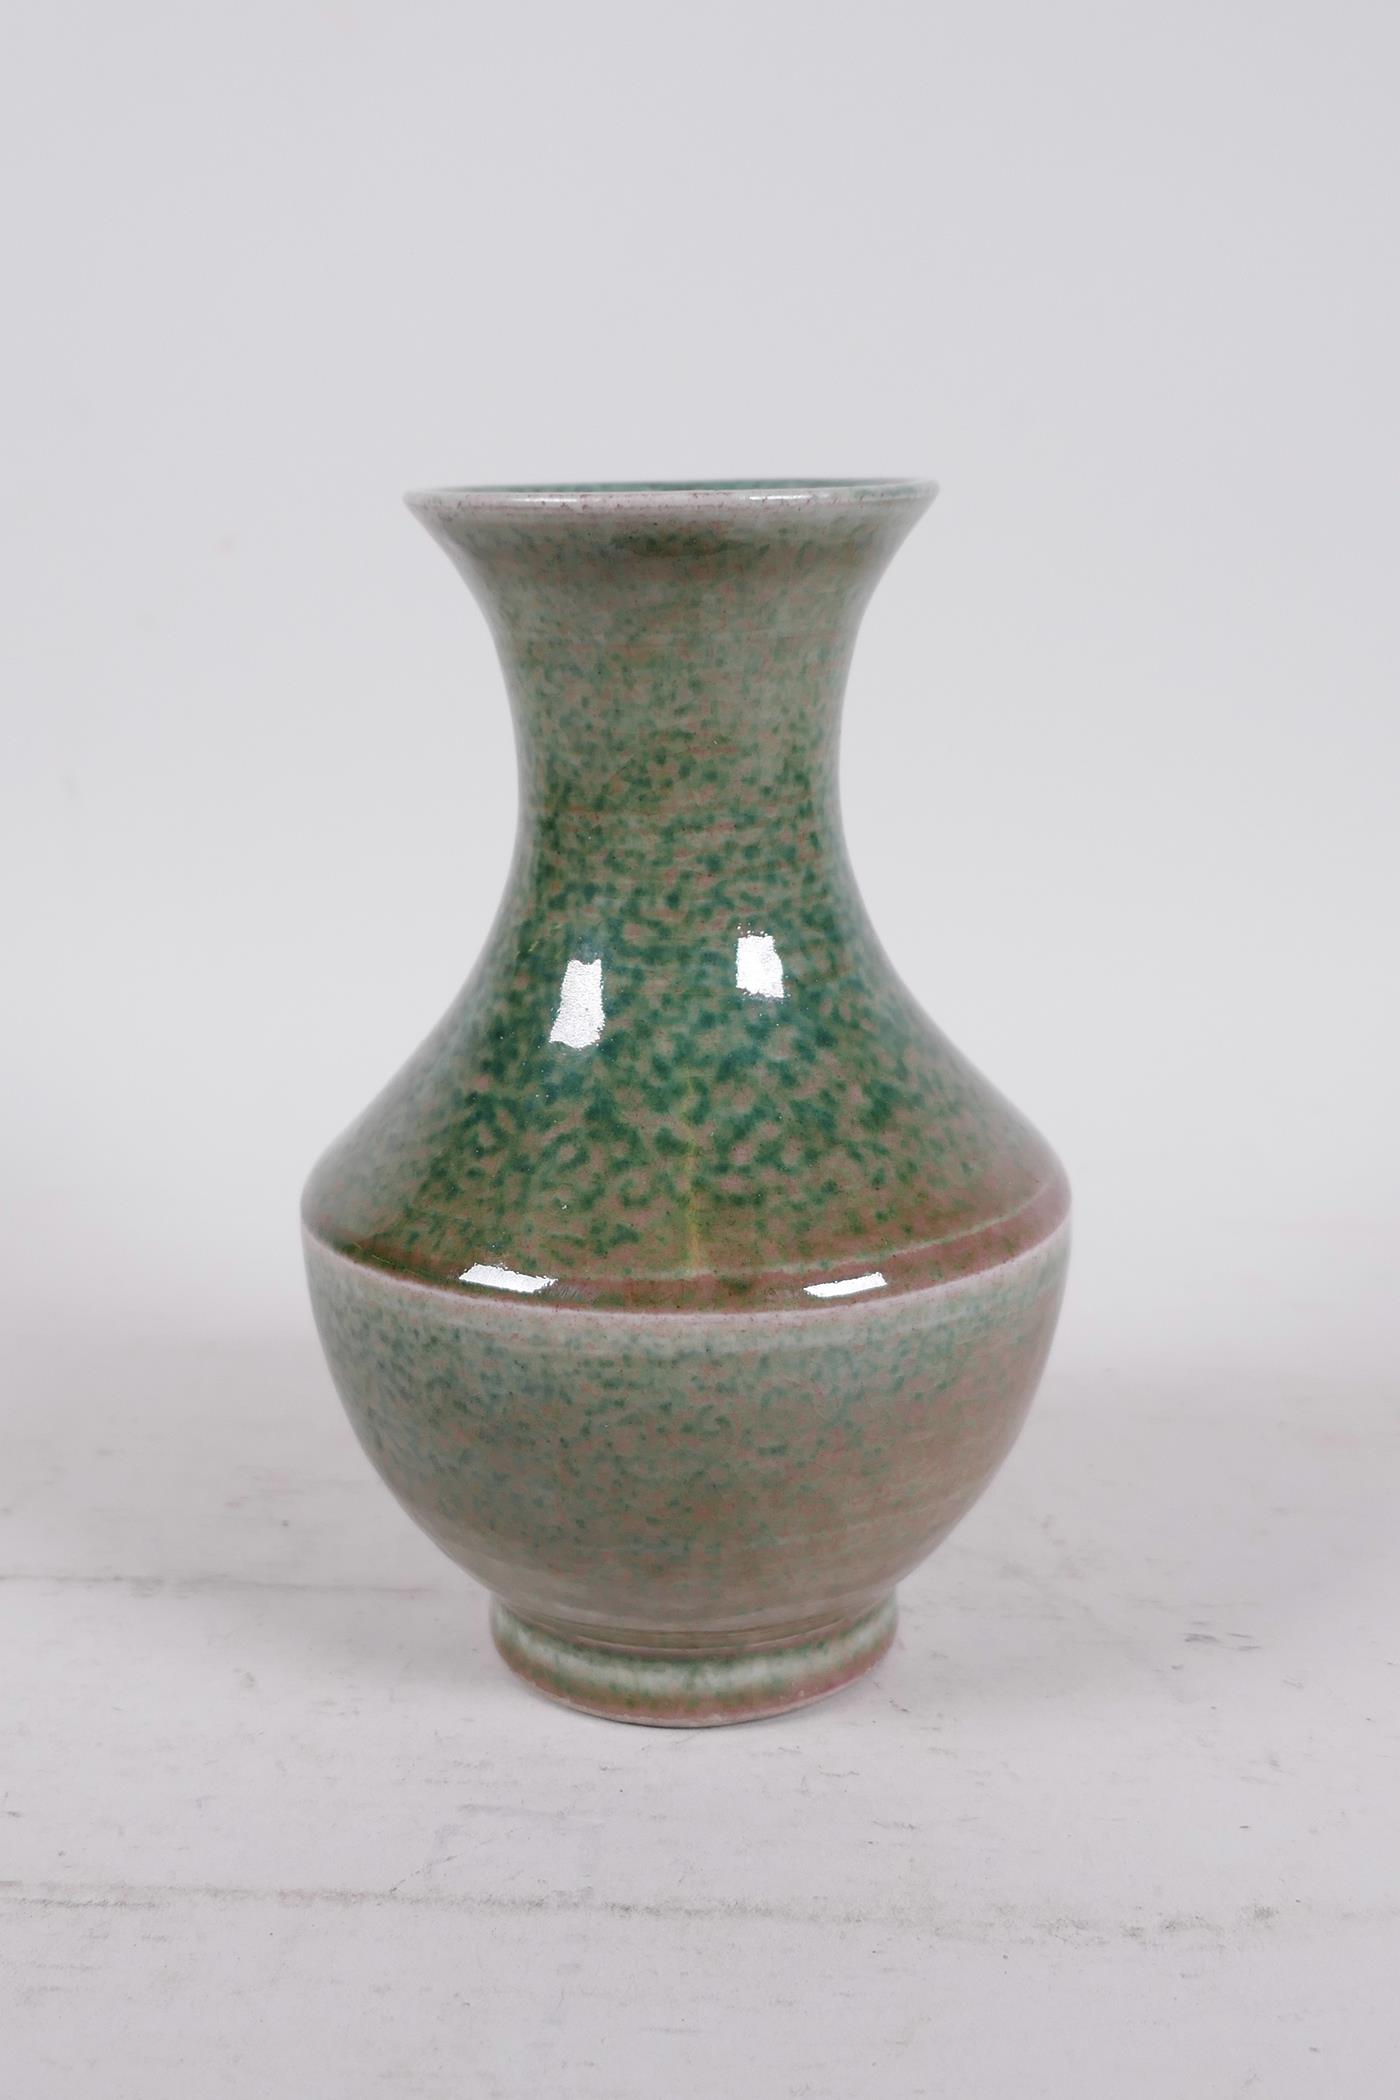 A Chinese mottled green glazed pottery vase, 6" high - Image 2 of 4